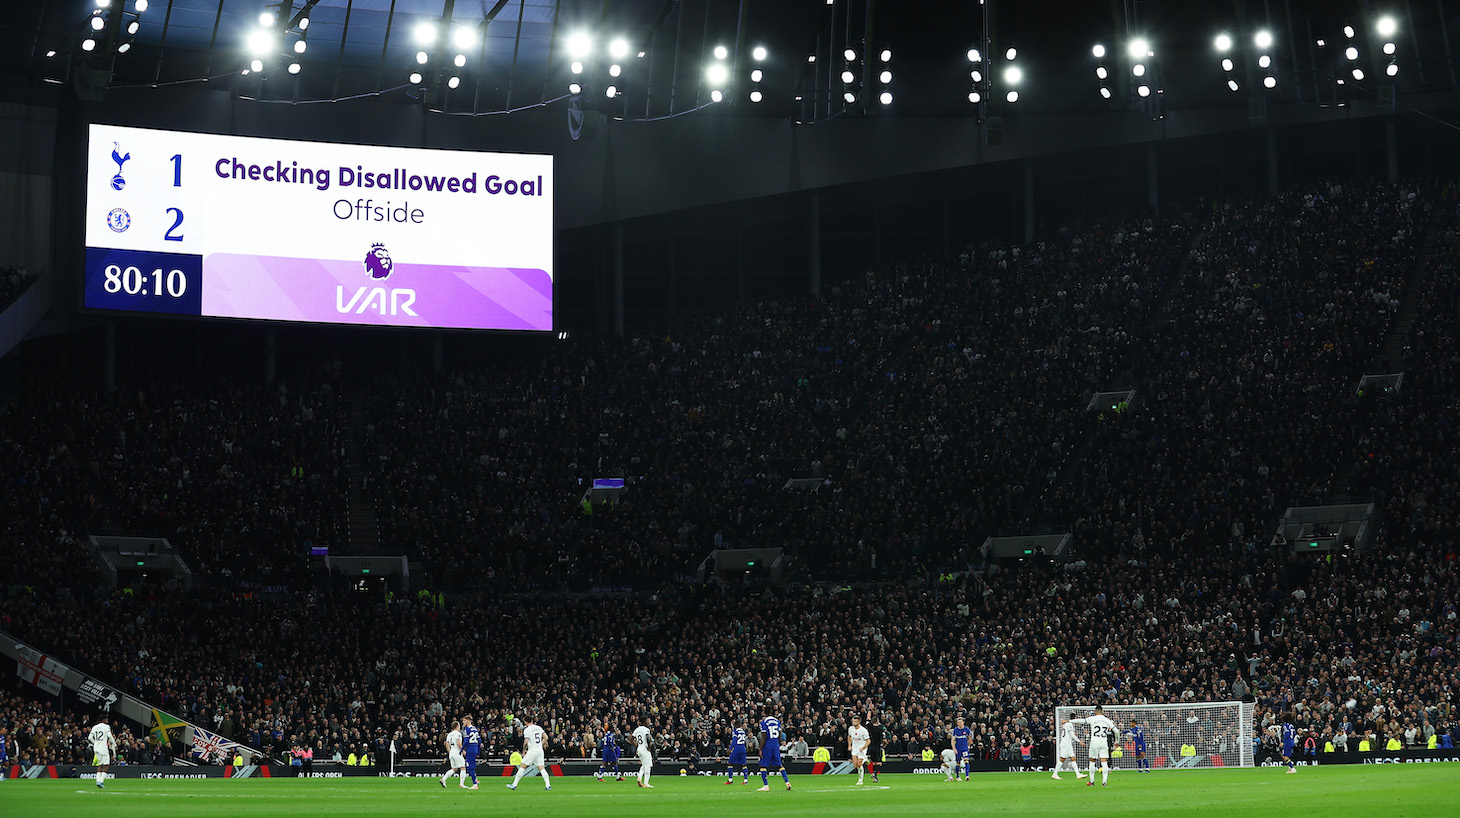 The LED board shows the VAR check which disallows a Tottenham Hotspur goal for offside during the Premier League match between Tottenham Hotspur and Chelsea FC at Tottenham Hotspur Stadium on November 06, 2023 in London, England.